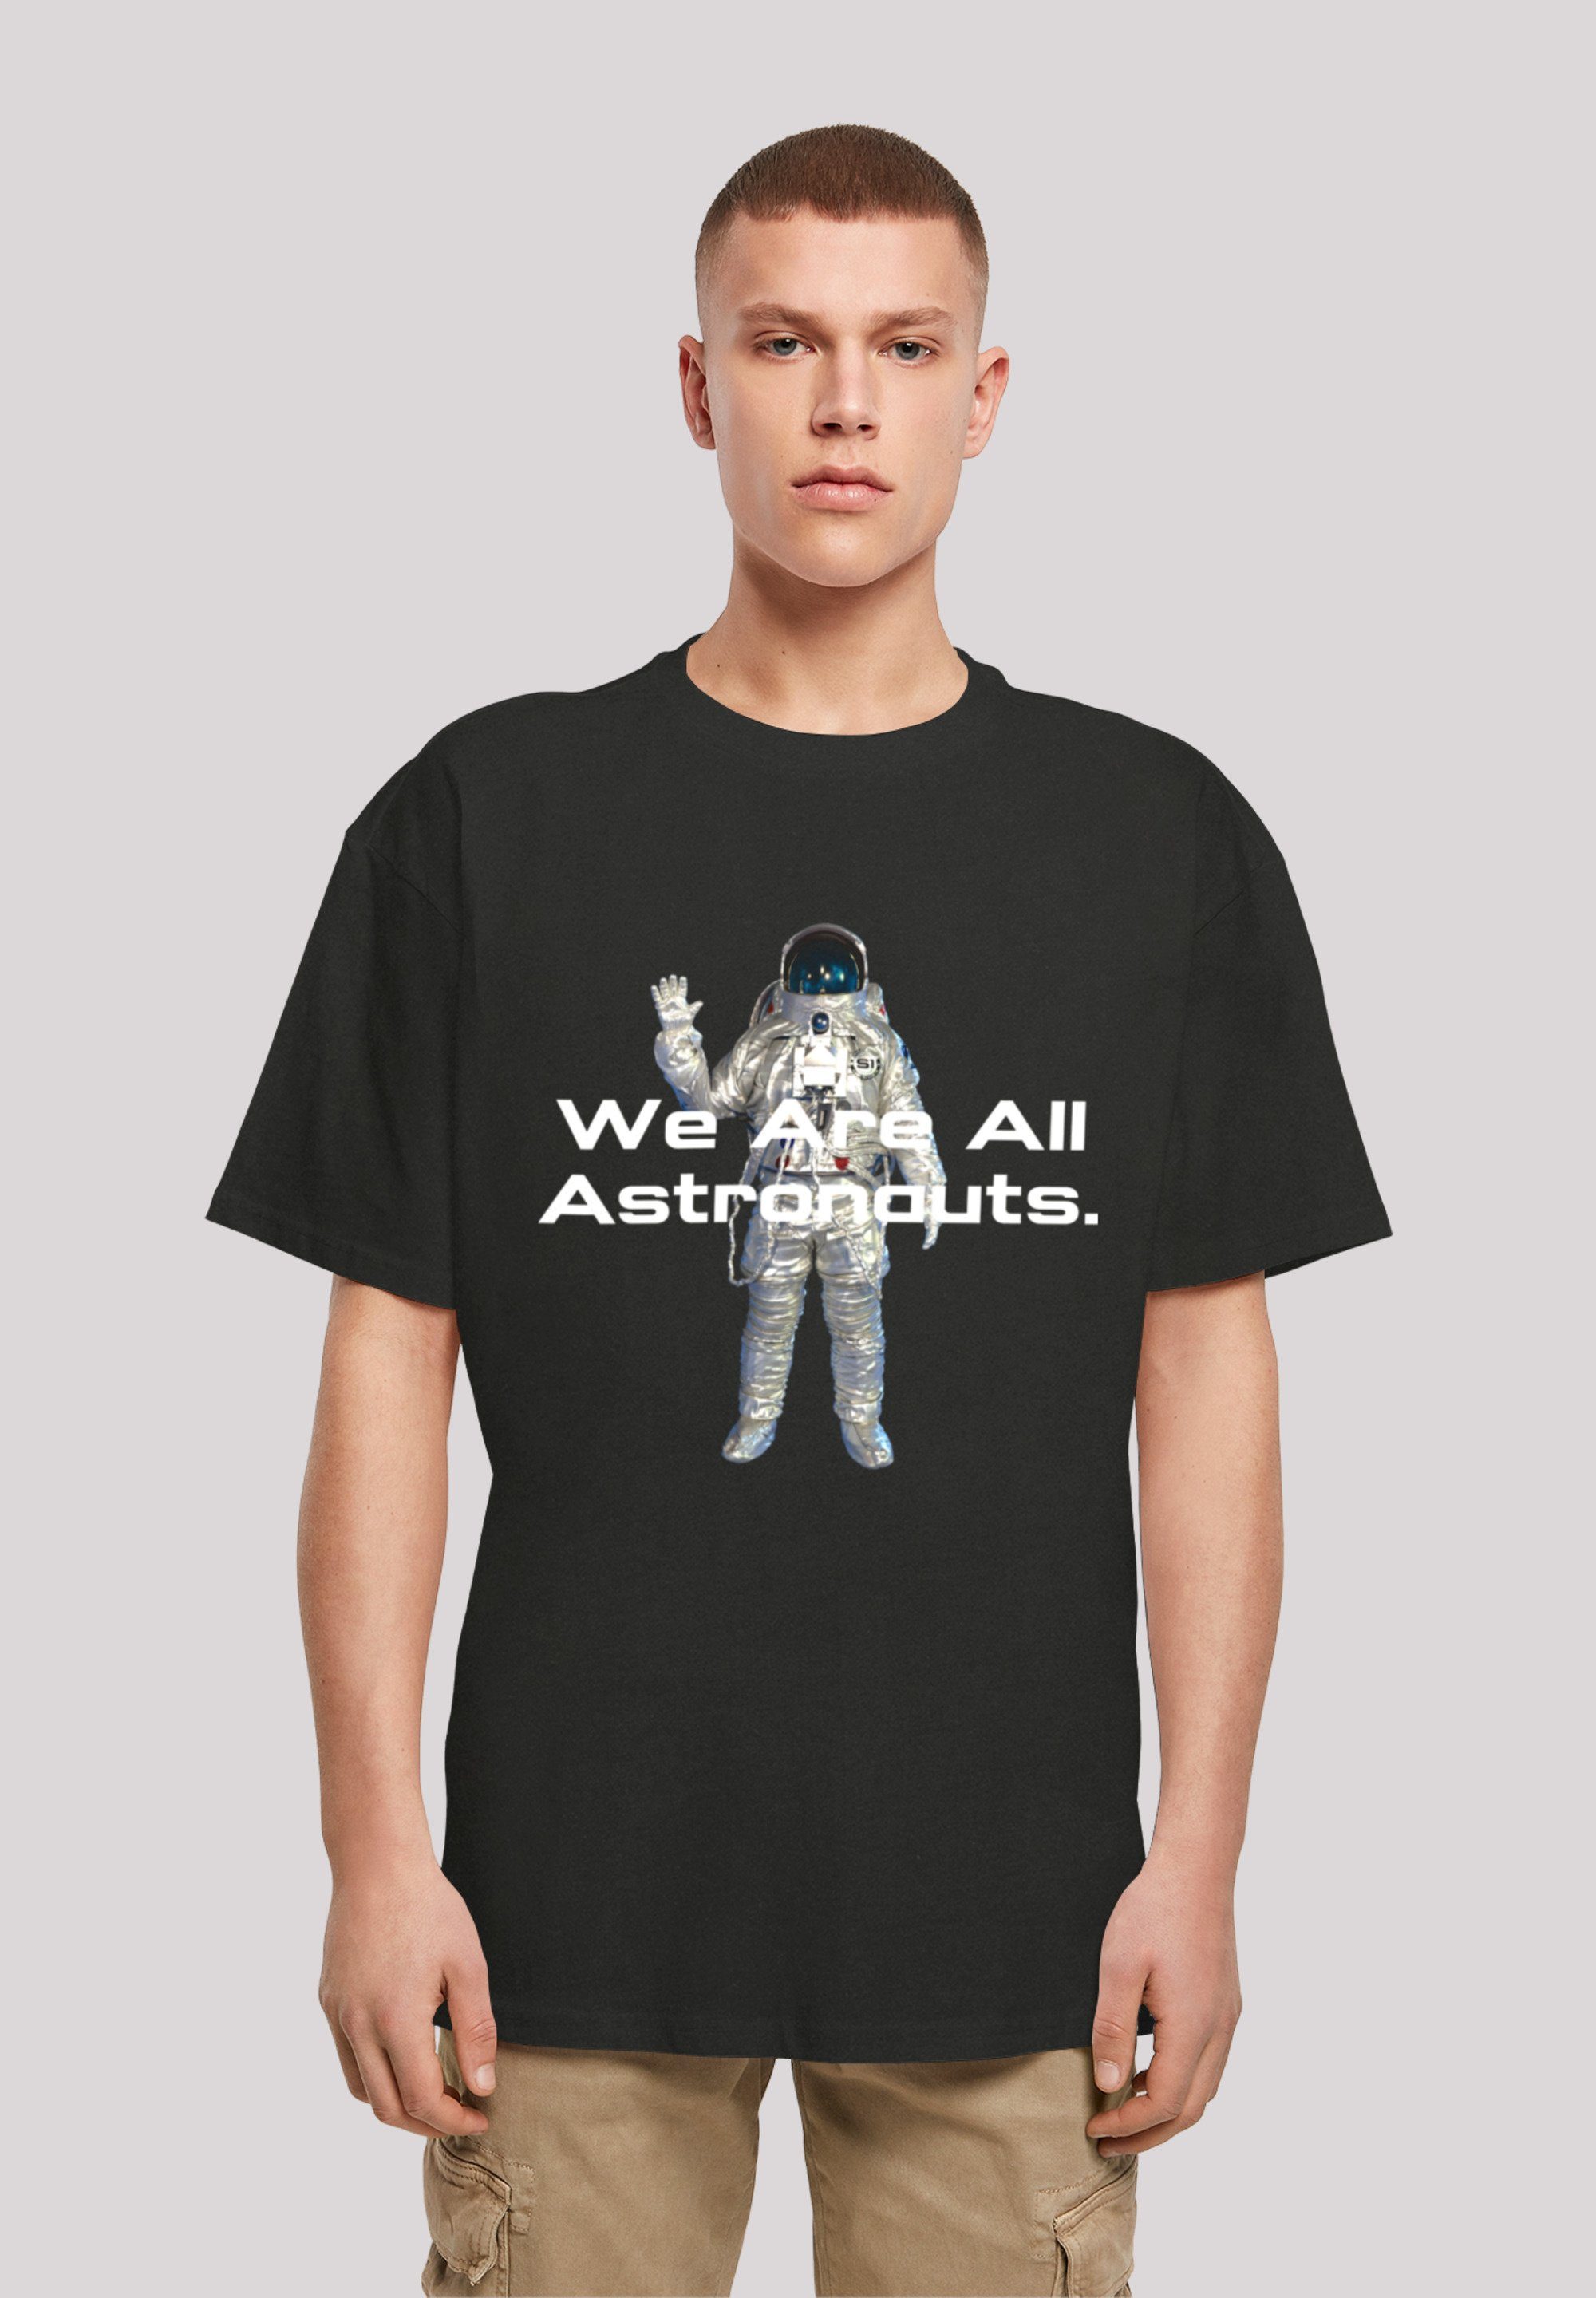 F4NT4STIC are T-Shirt astronauts all PHIBER We schwarz Print SpaceOne